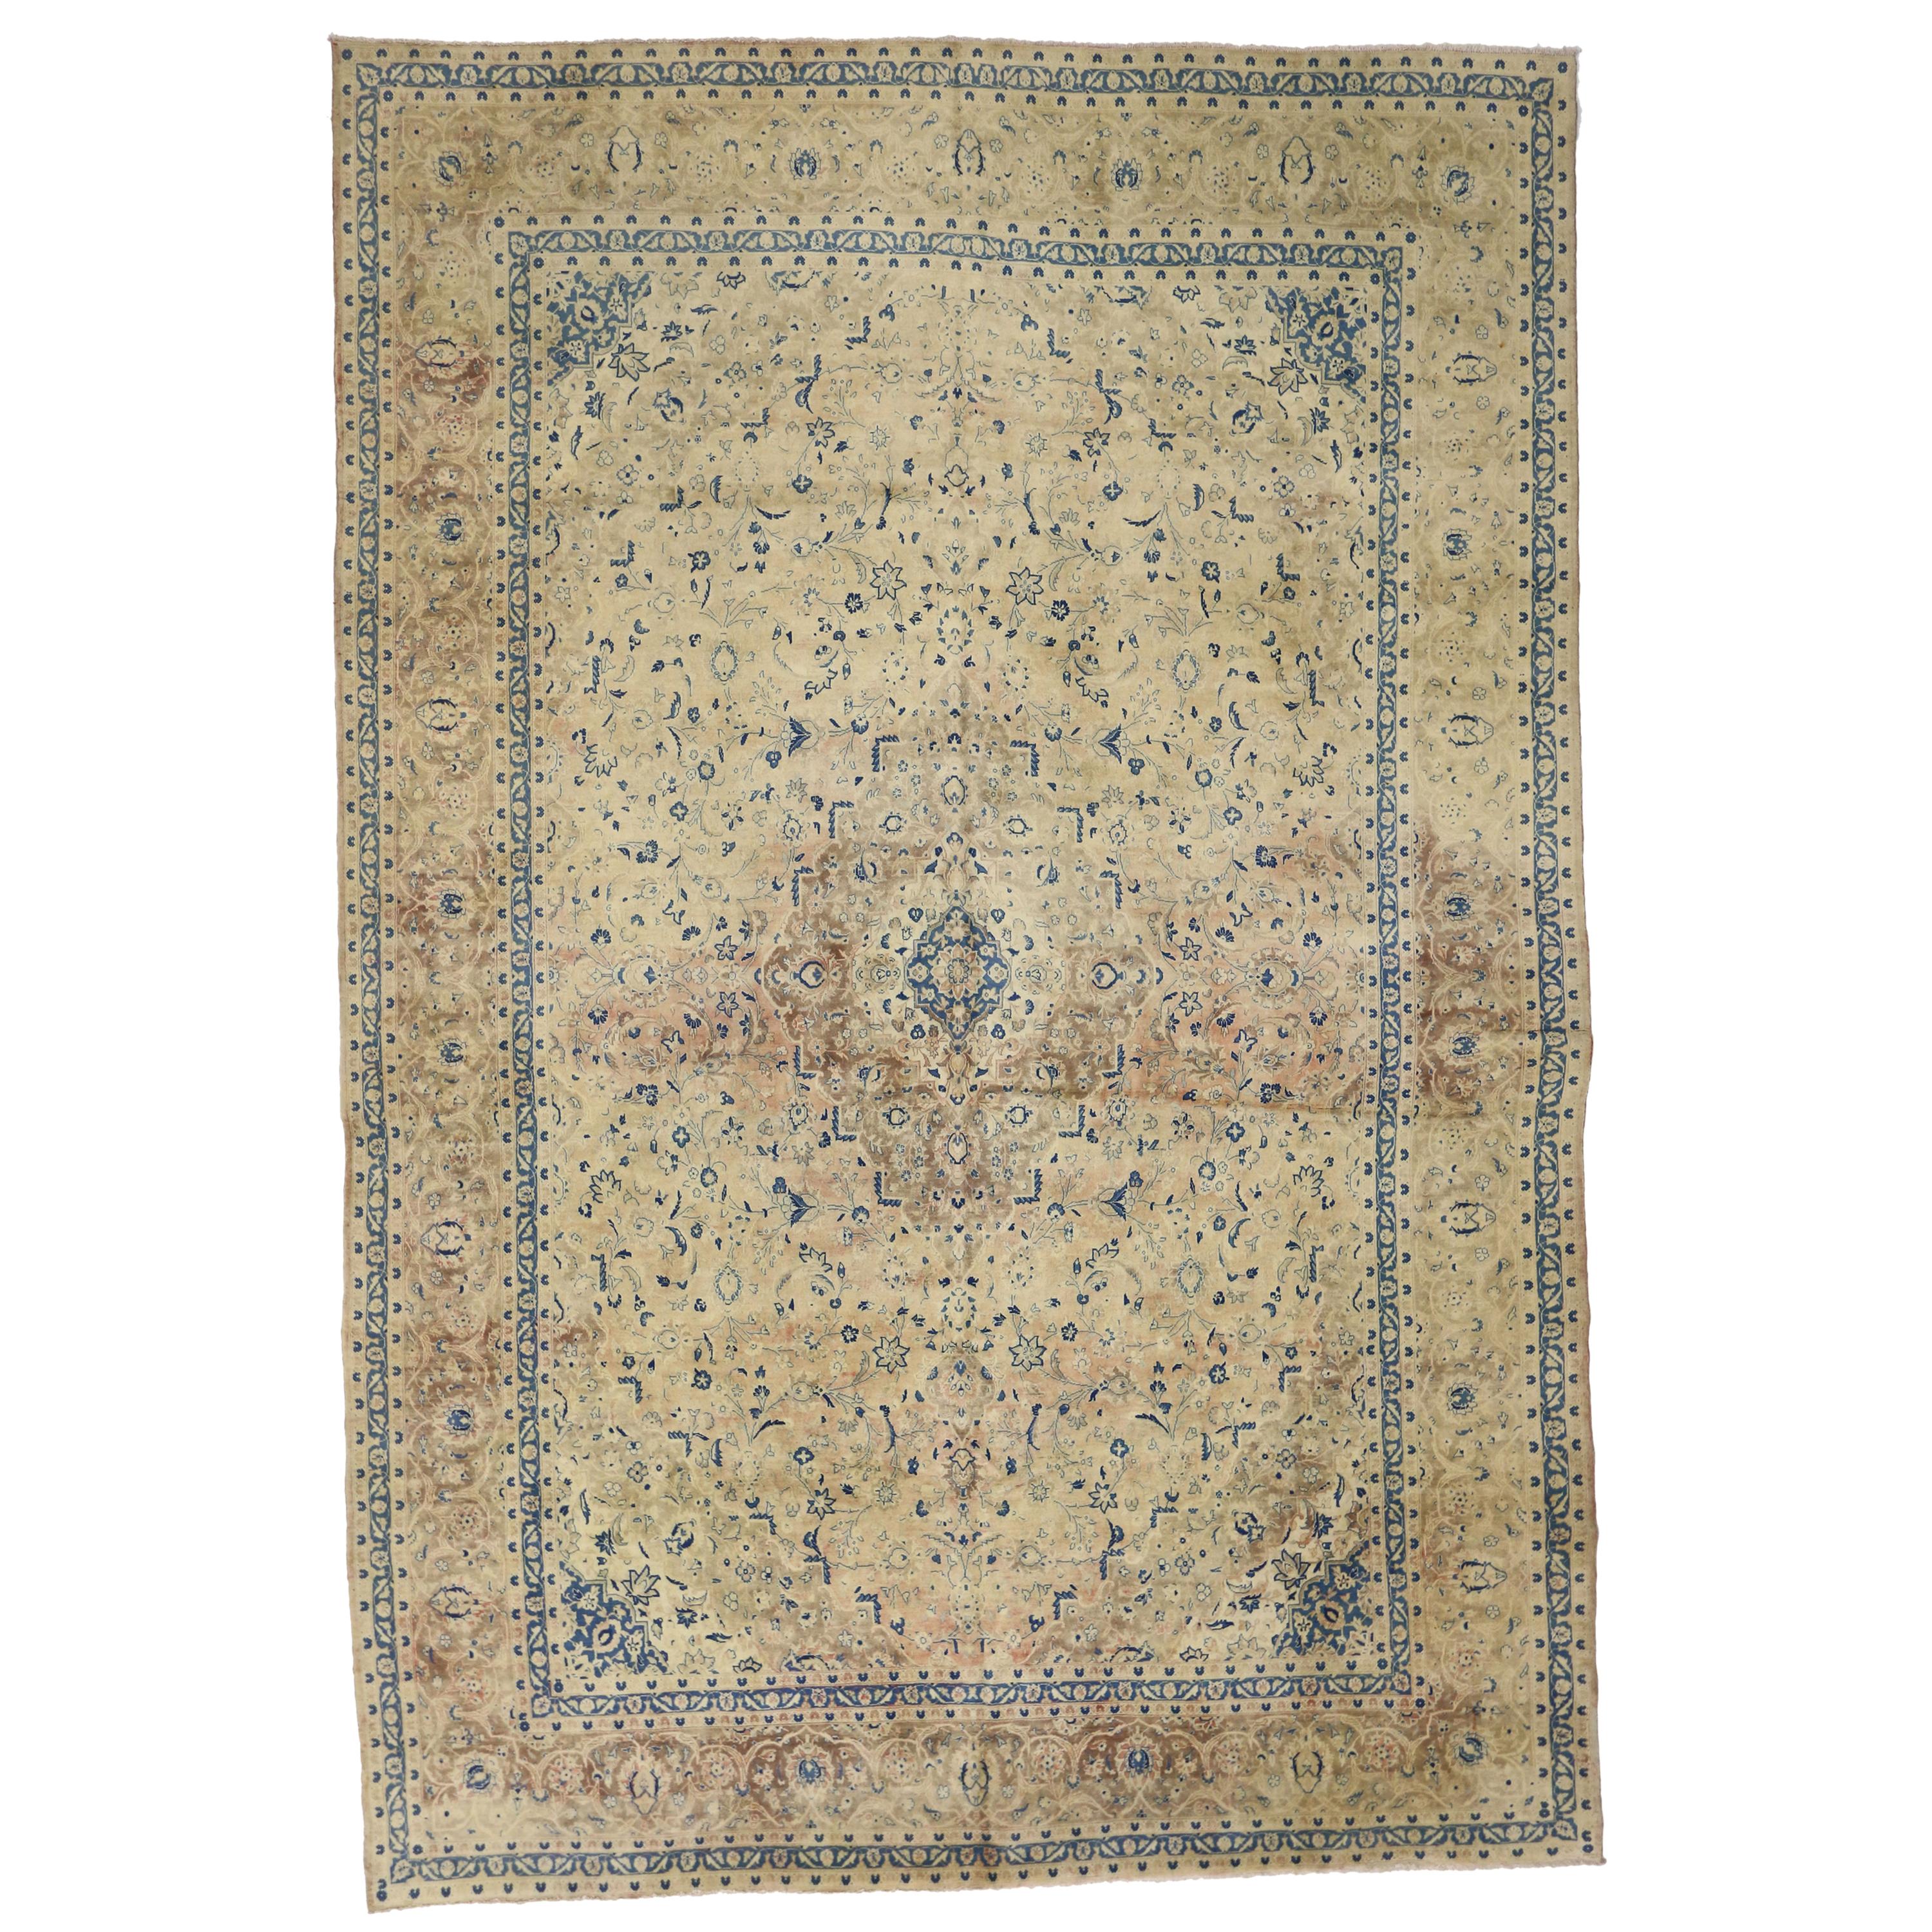 Vintage Persian Kashan Palace Rug with French Country Style